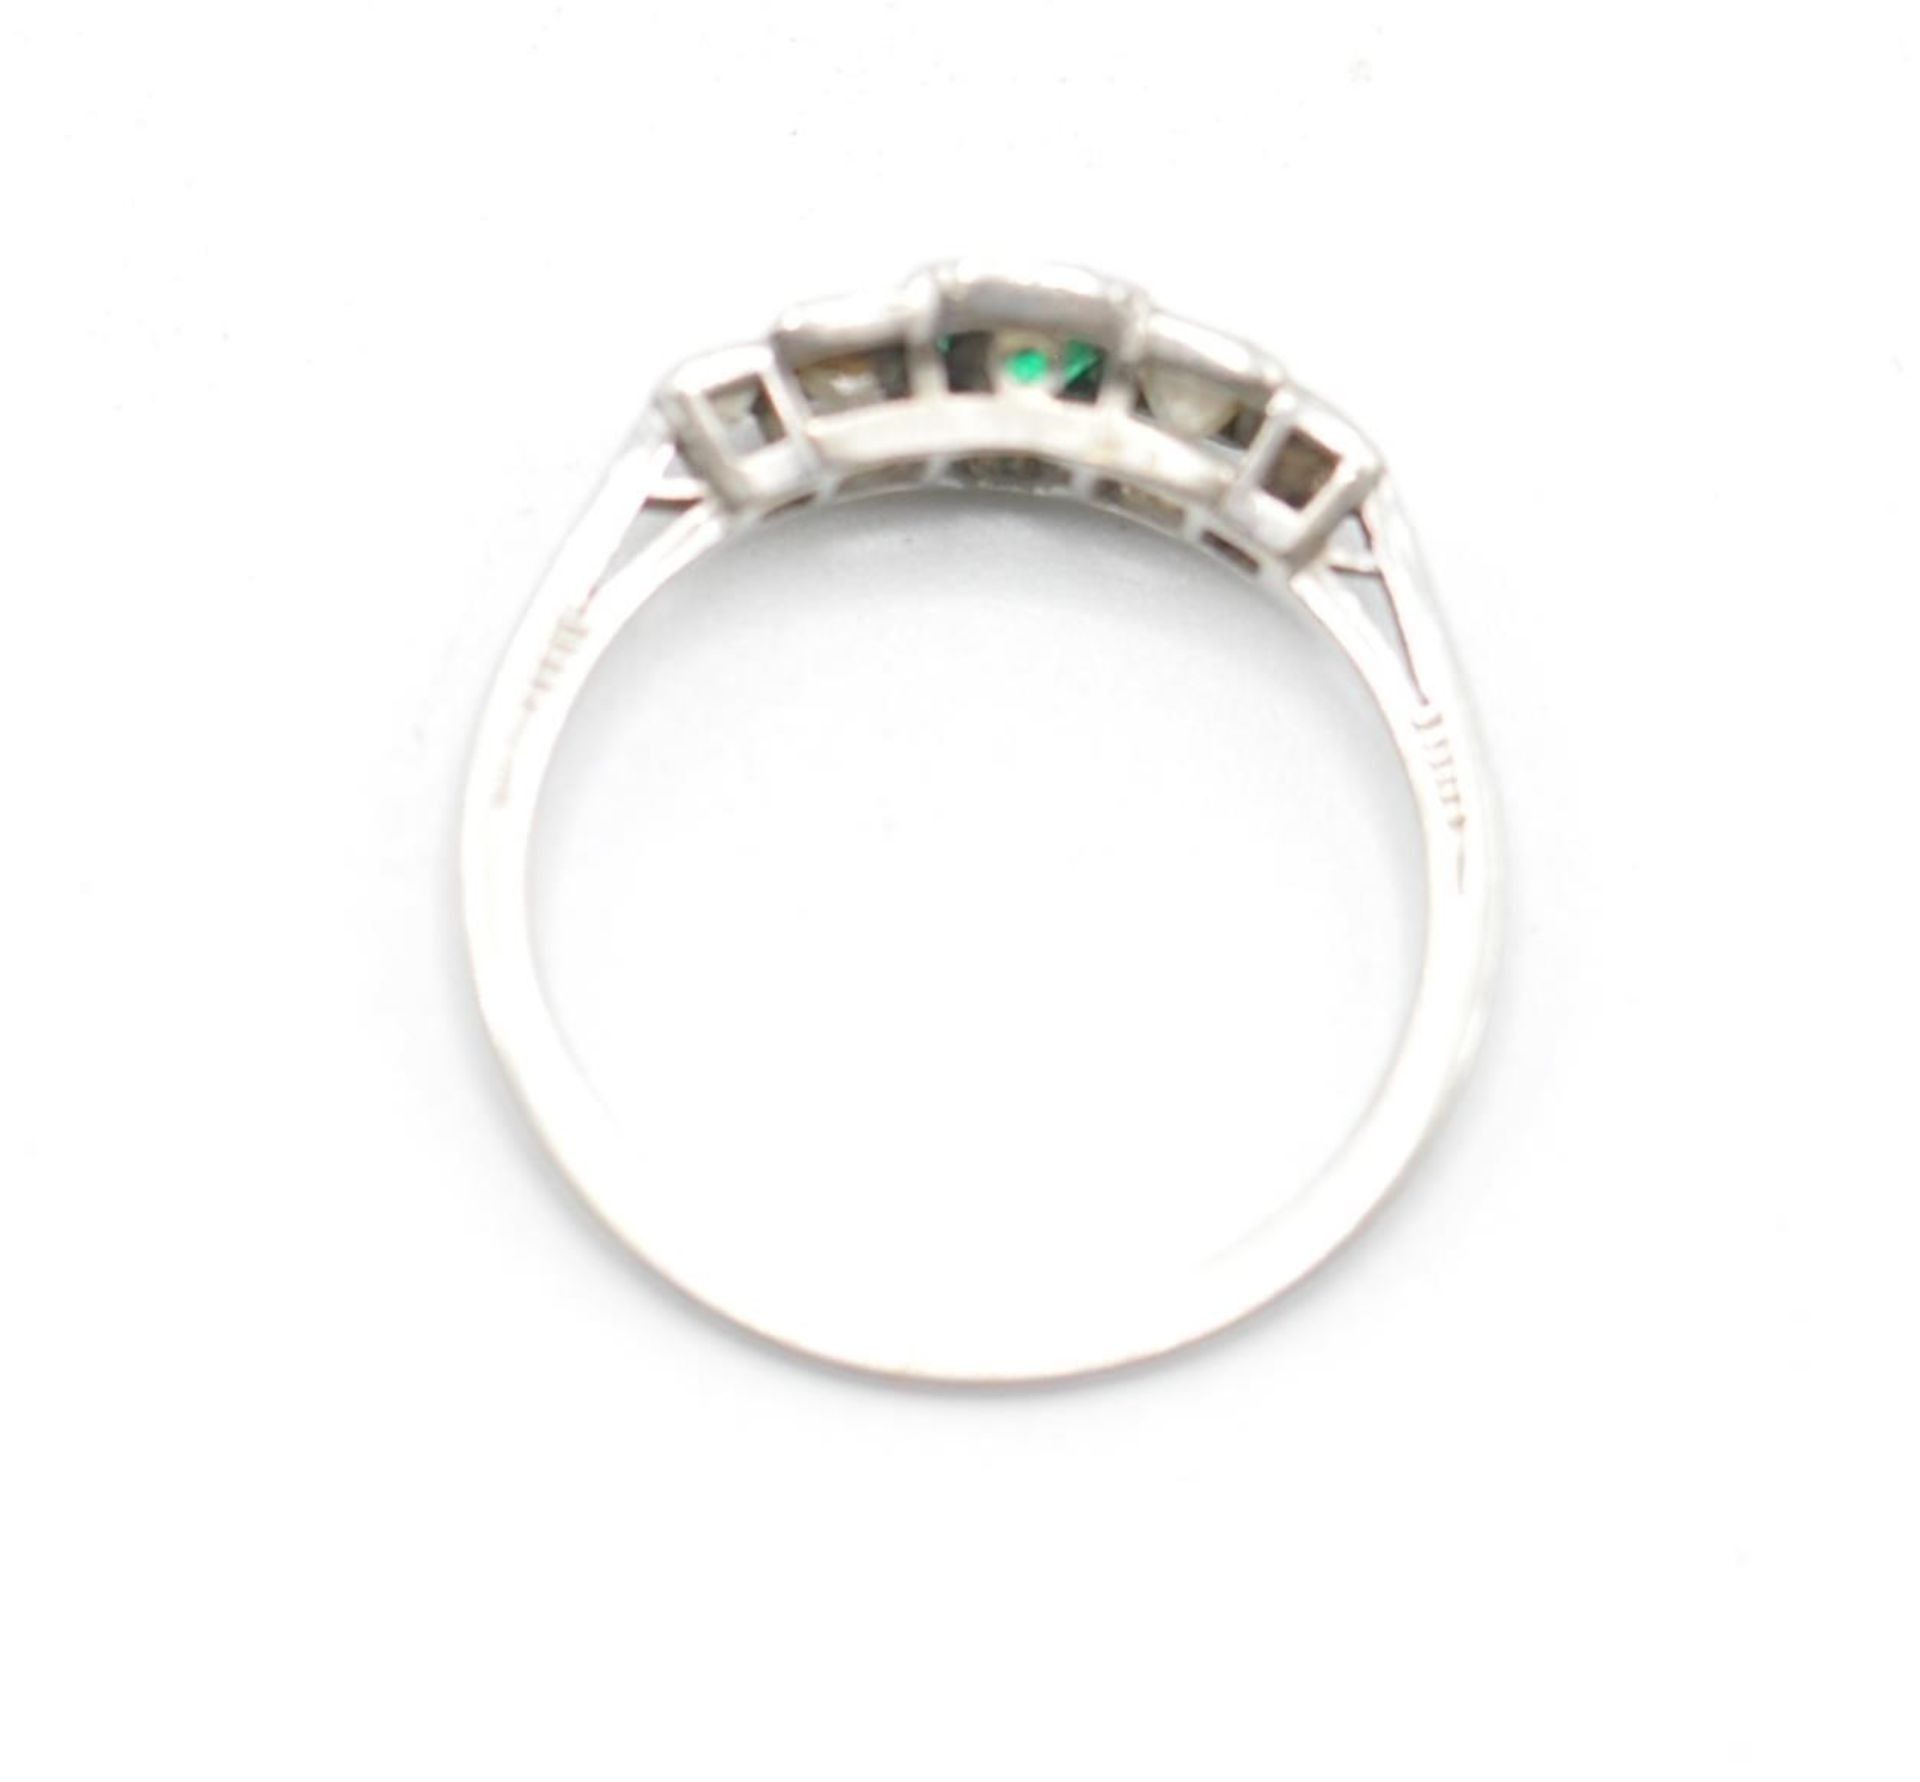 A platinum, emerald and diamonds ring having a central rectangular cut emerald flanked by four - Bild 5 aus 5